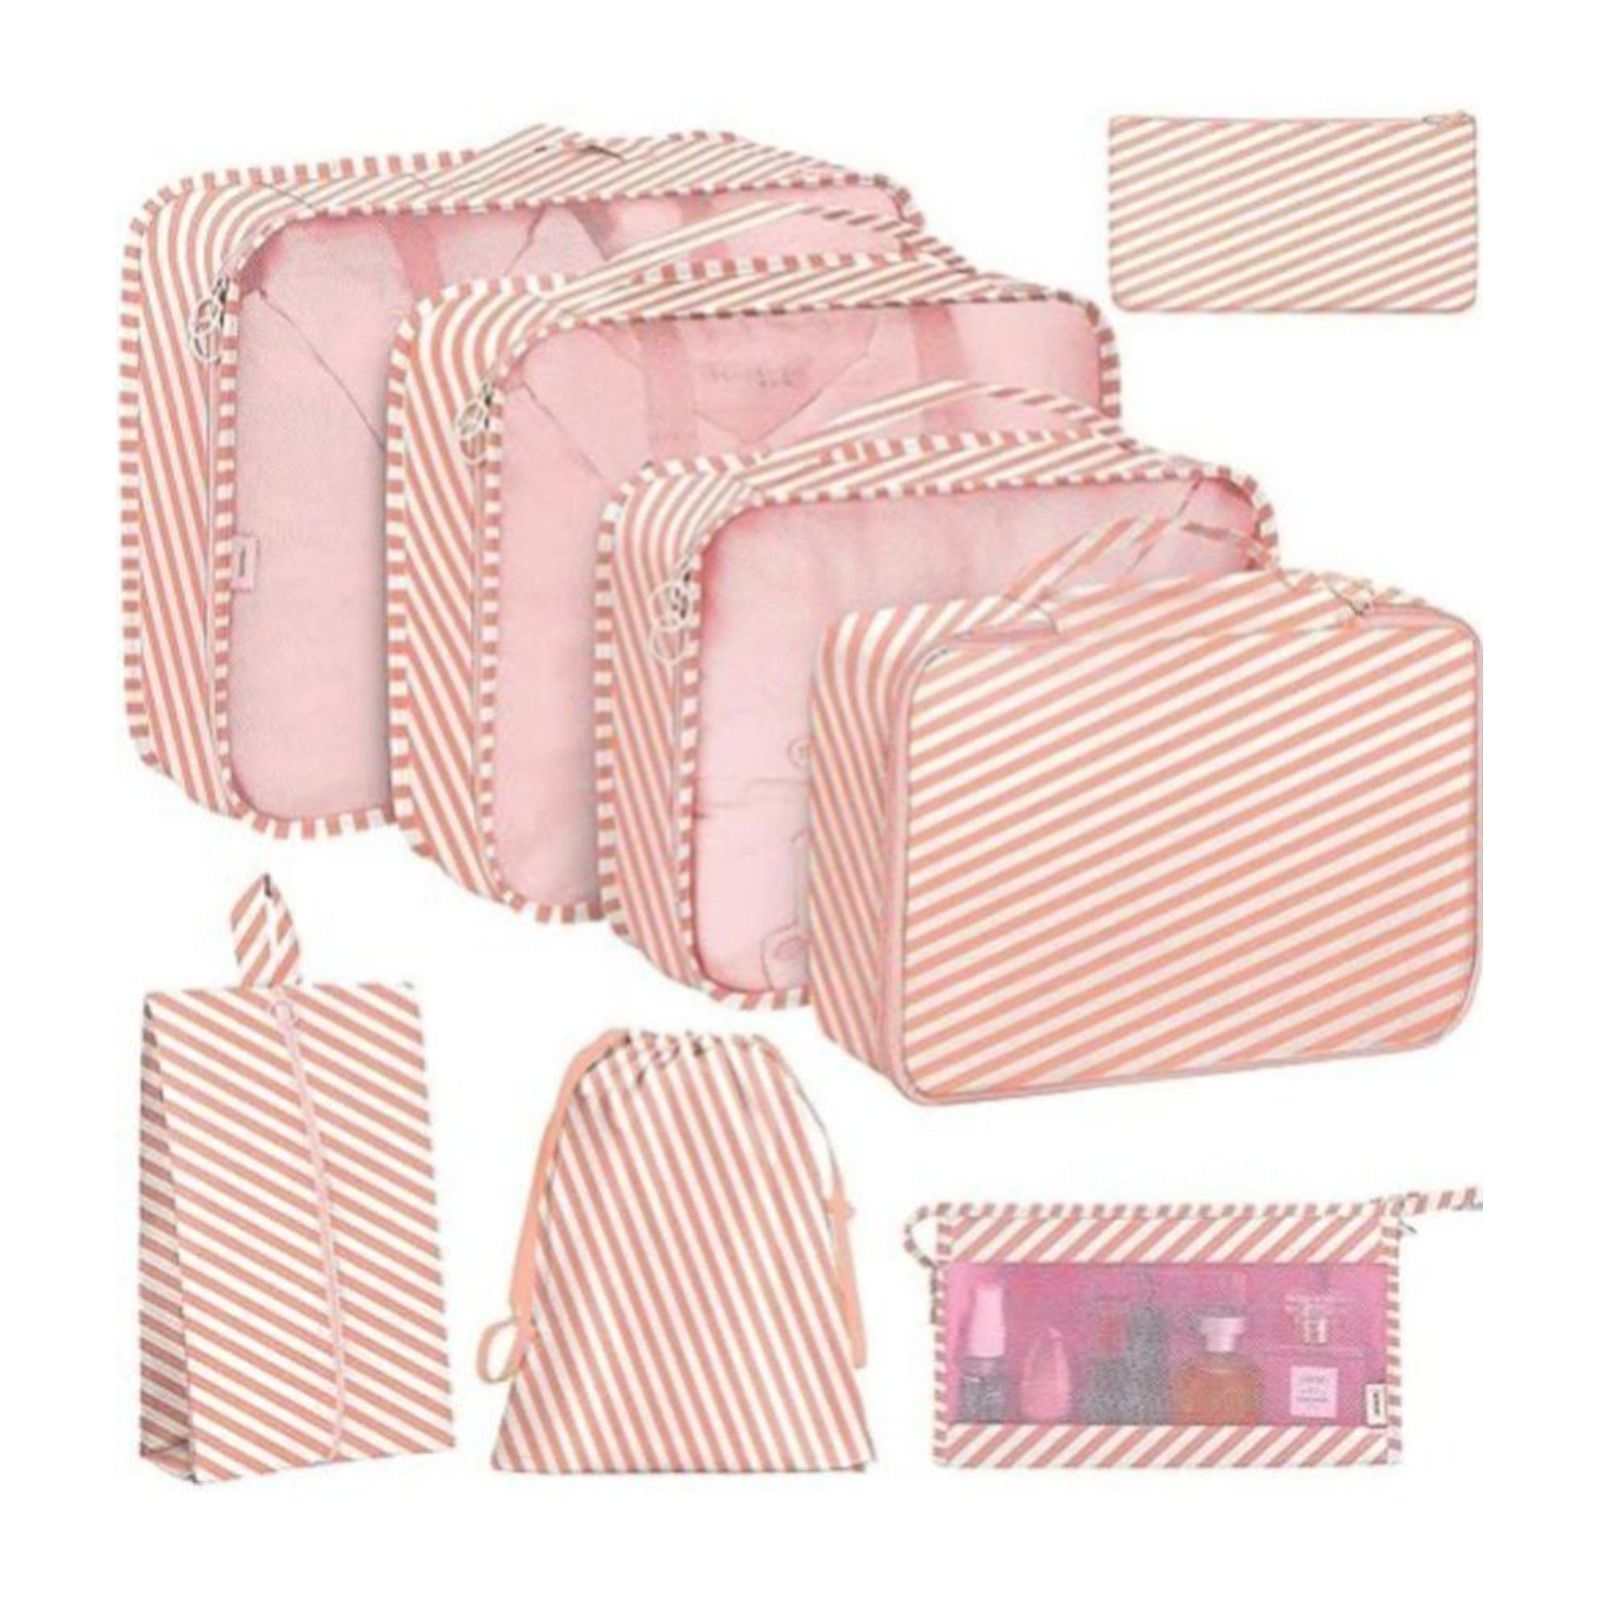     			House Of Quirk Pink Travel Luggage with Laundry Bag Set of 8